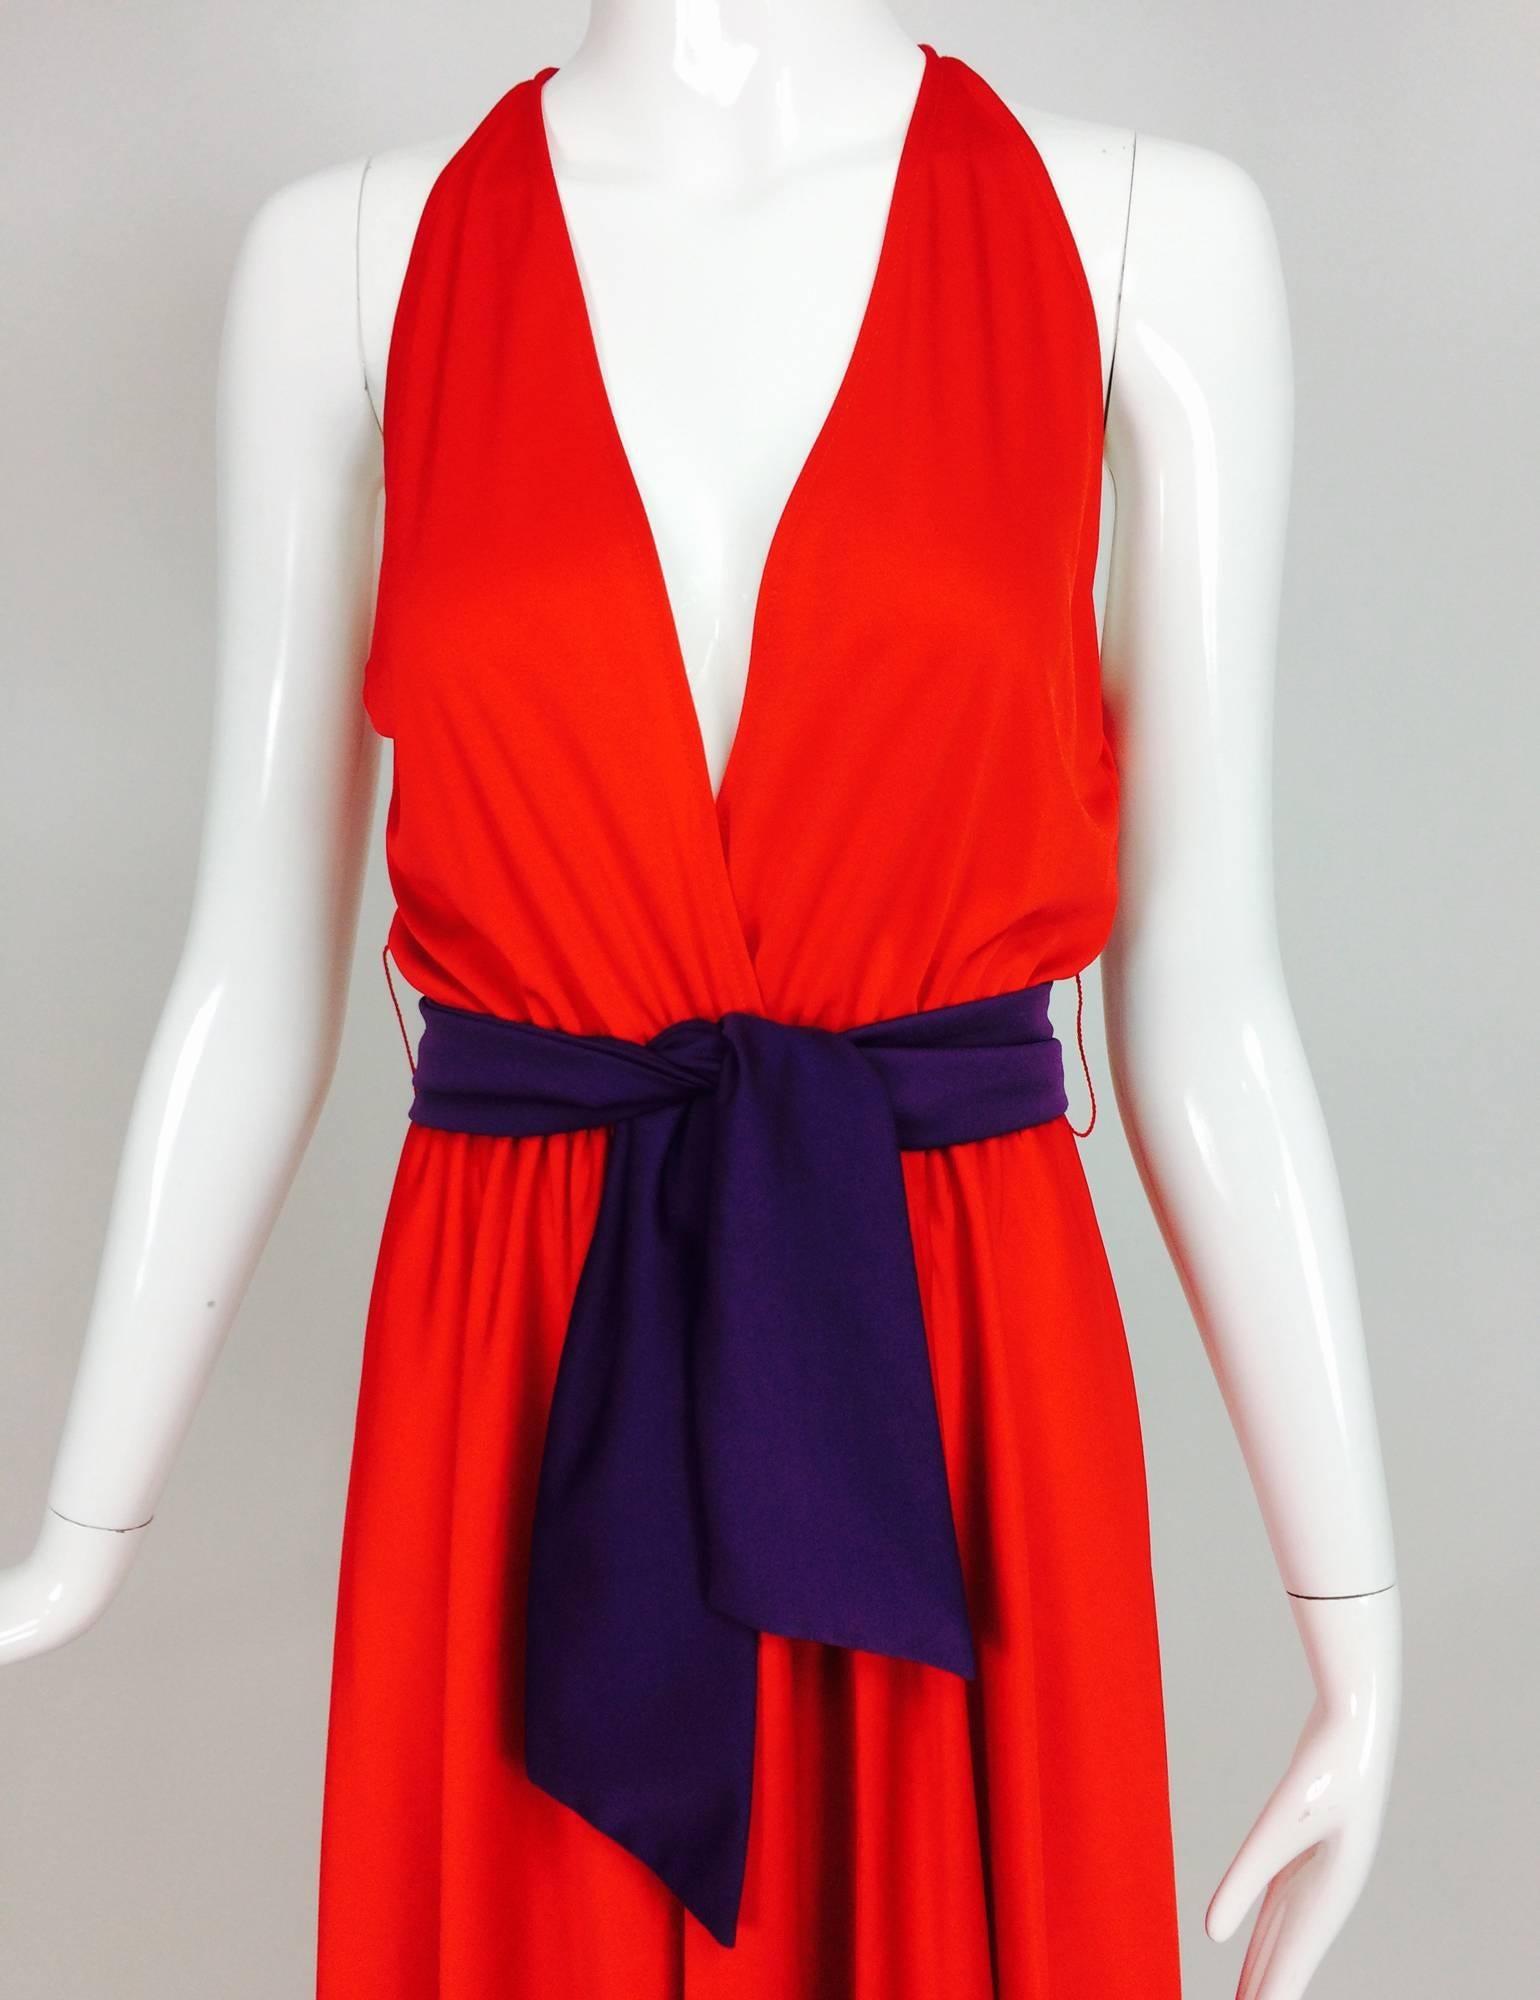 Vintage Halston silky red & purple jersey halter plunge wrap front, dip hem dress...This great dress is so easy to wear, it wraps at the waist front with cased elastic and two bar hooks for exact fit...Sleeveless halter neckline plunges at the